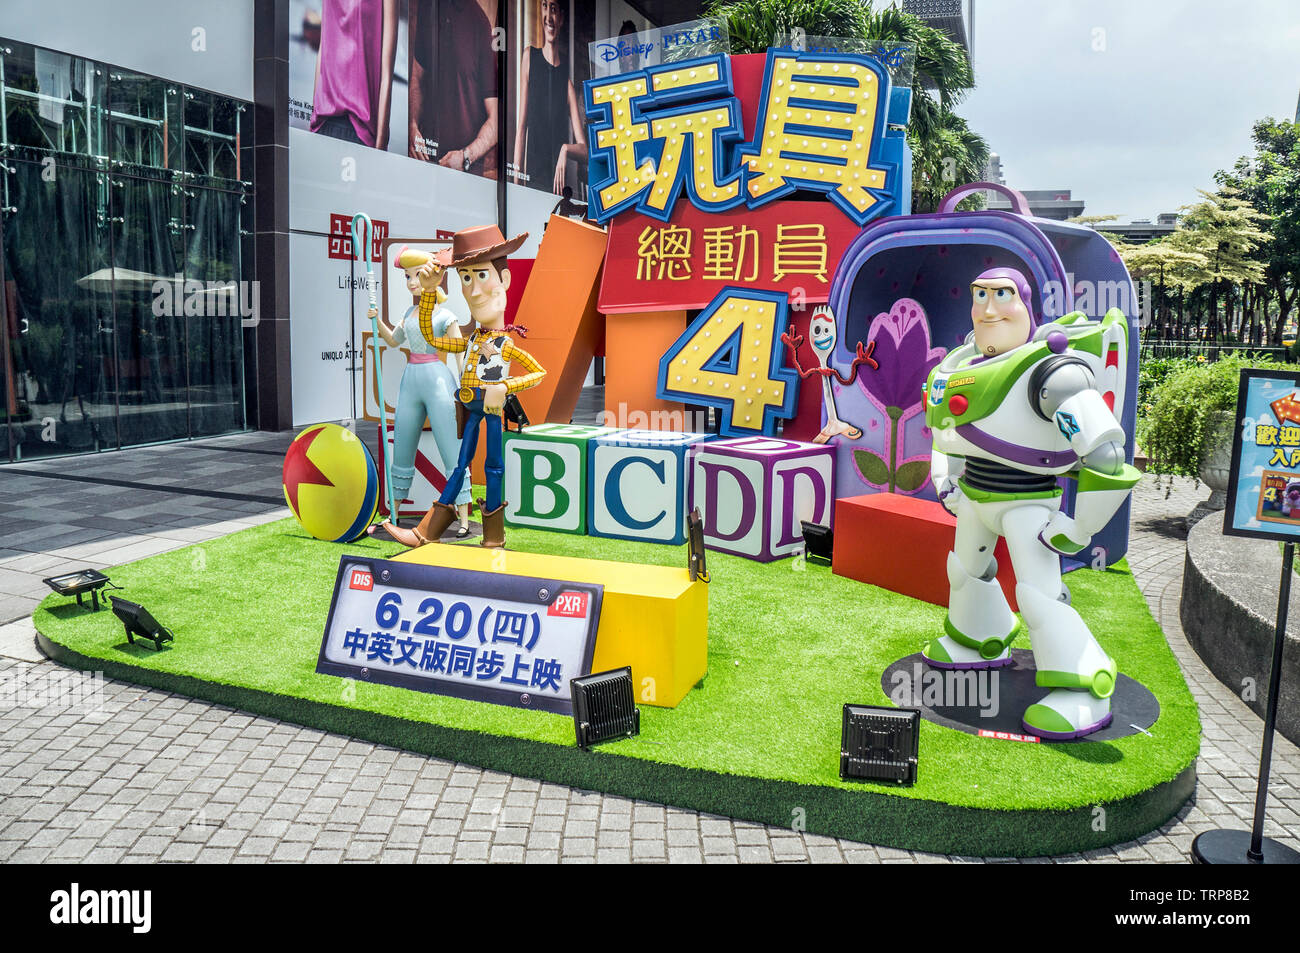 Taipei, Taiwan - June 6, 2019: Advertising decoration for the movie Toy Story 4 and displays at outdoor to promote the movie, Xinyi district of Taipe Stock Photo